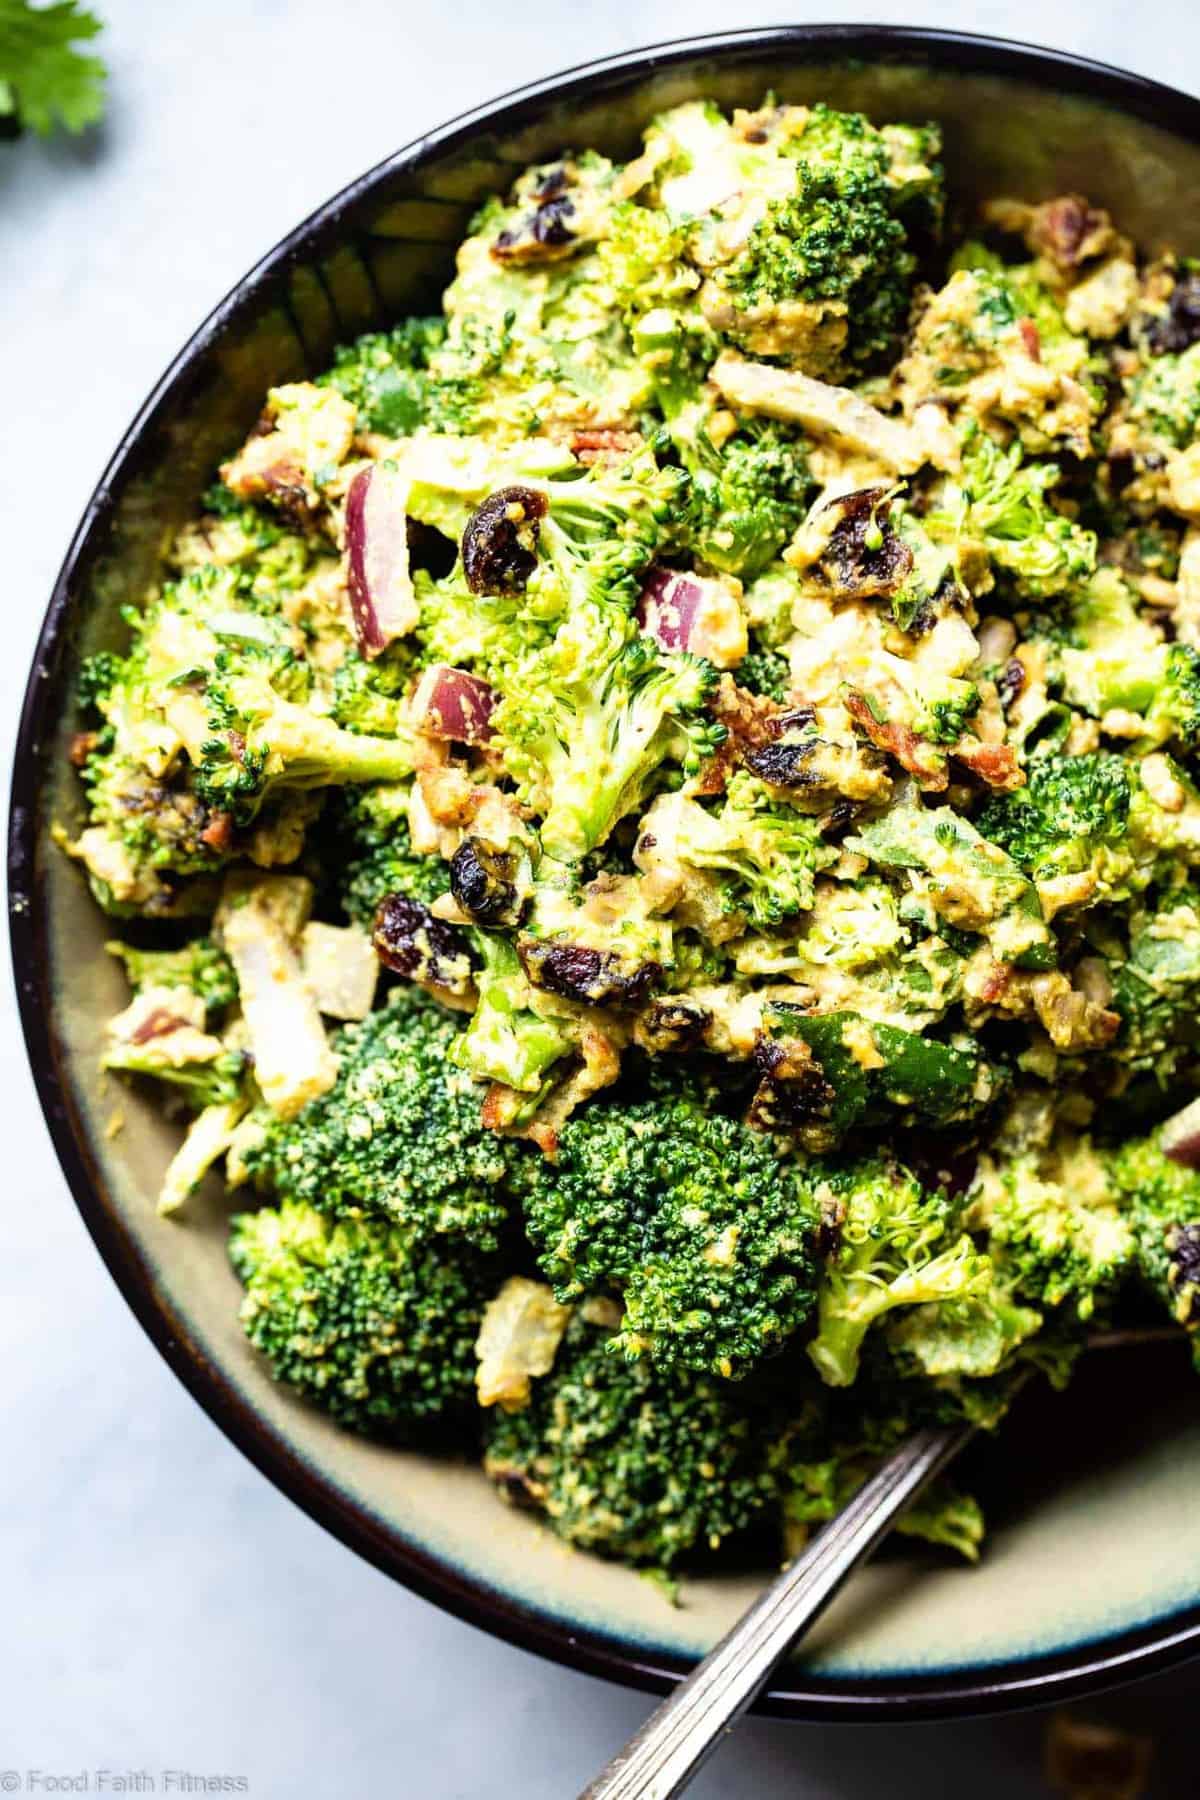 Curried Vegan Paleo Broccoli Cashew Salad -  This easy healthy broccoli salad is jazzed up with a curried cashew cream dressing. It's a quick, easy, gluten and dairy free side that's always a crowd pleaser! | #Foodfaithfitness | #Glutenfree #Paleo #Vegan #Dairyfree #Healthy